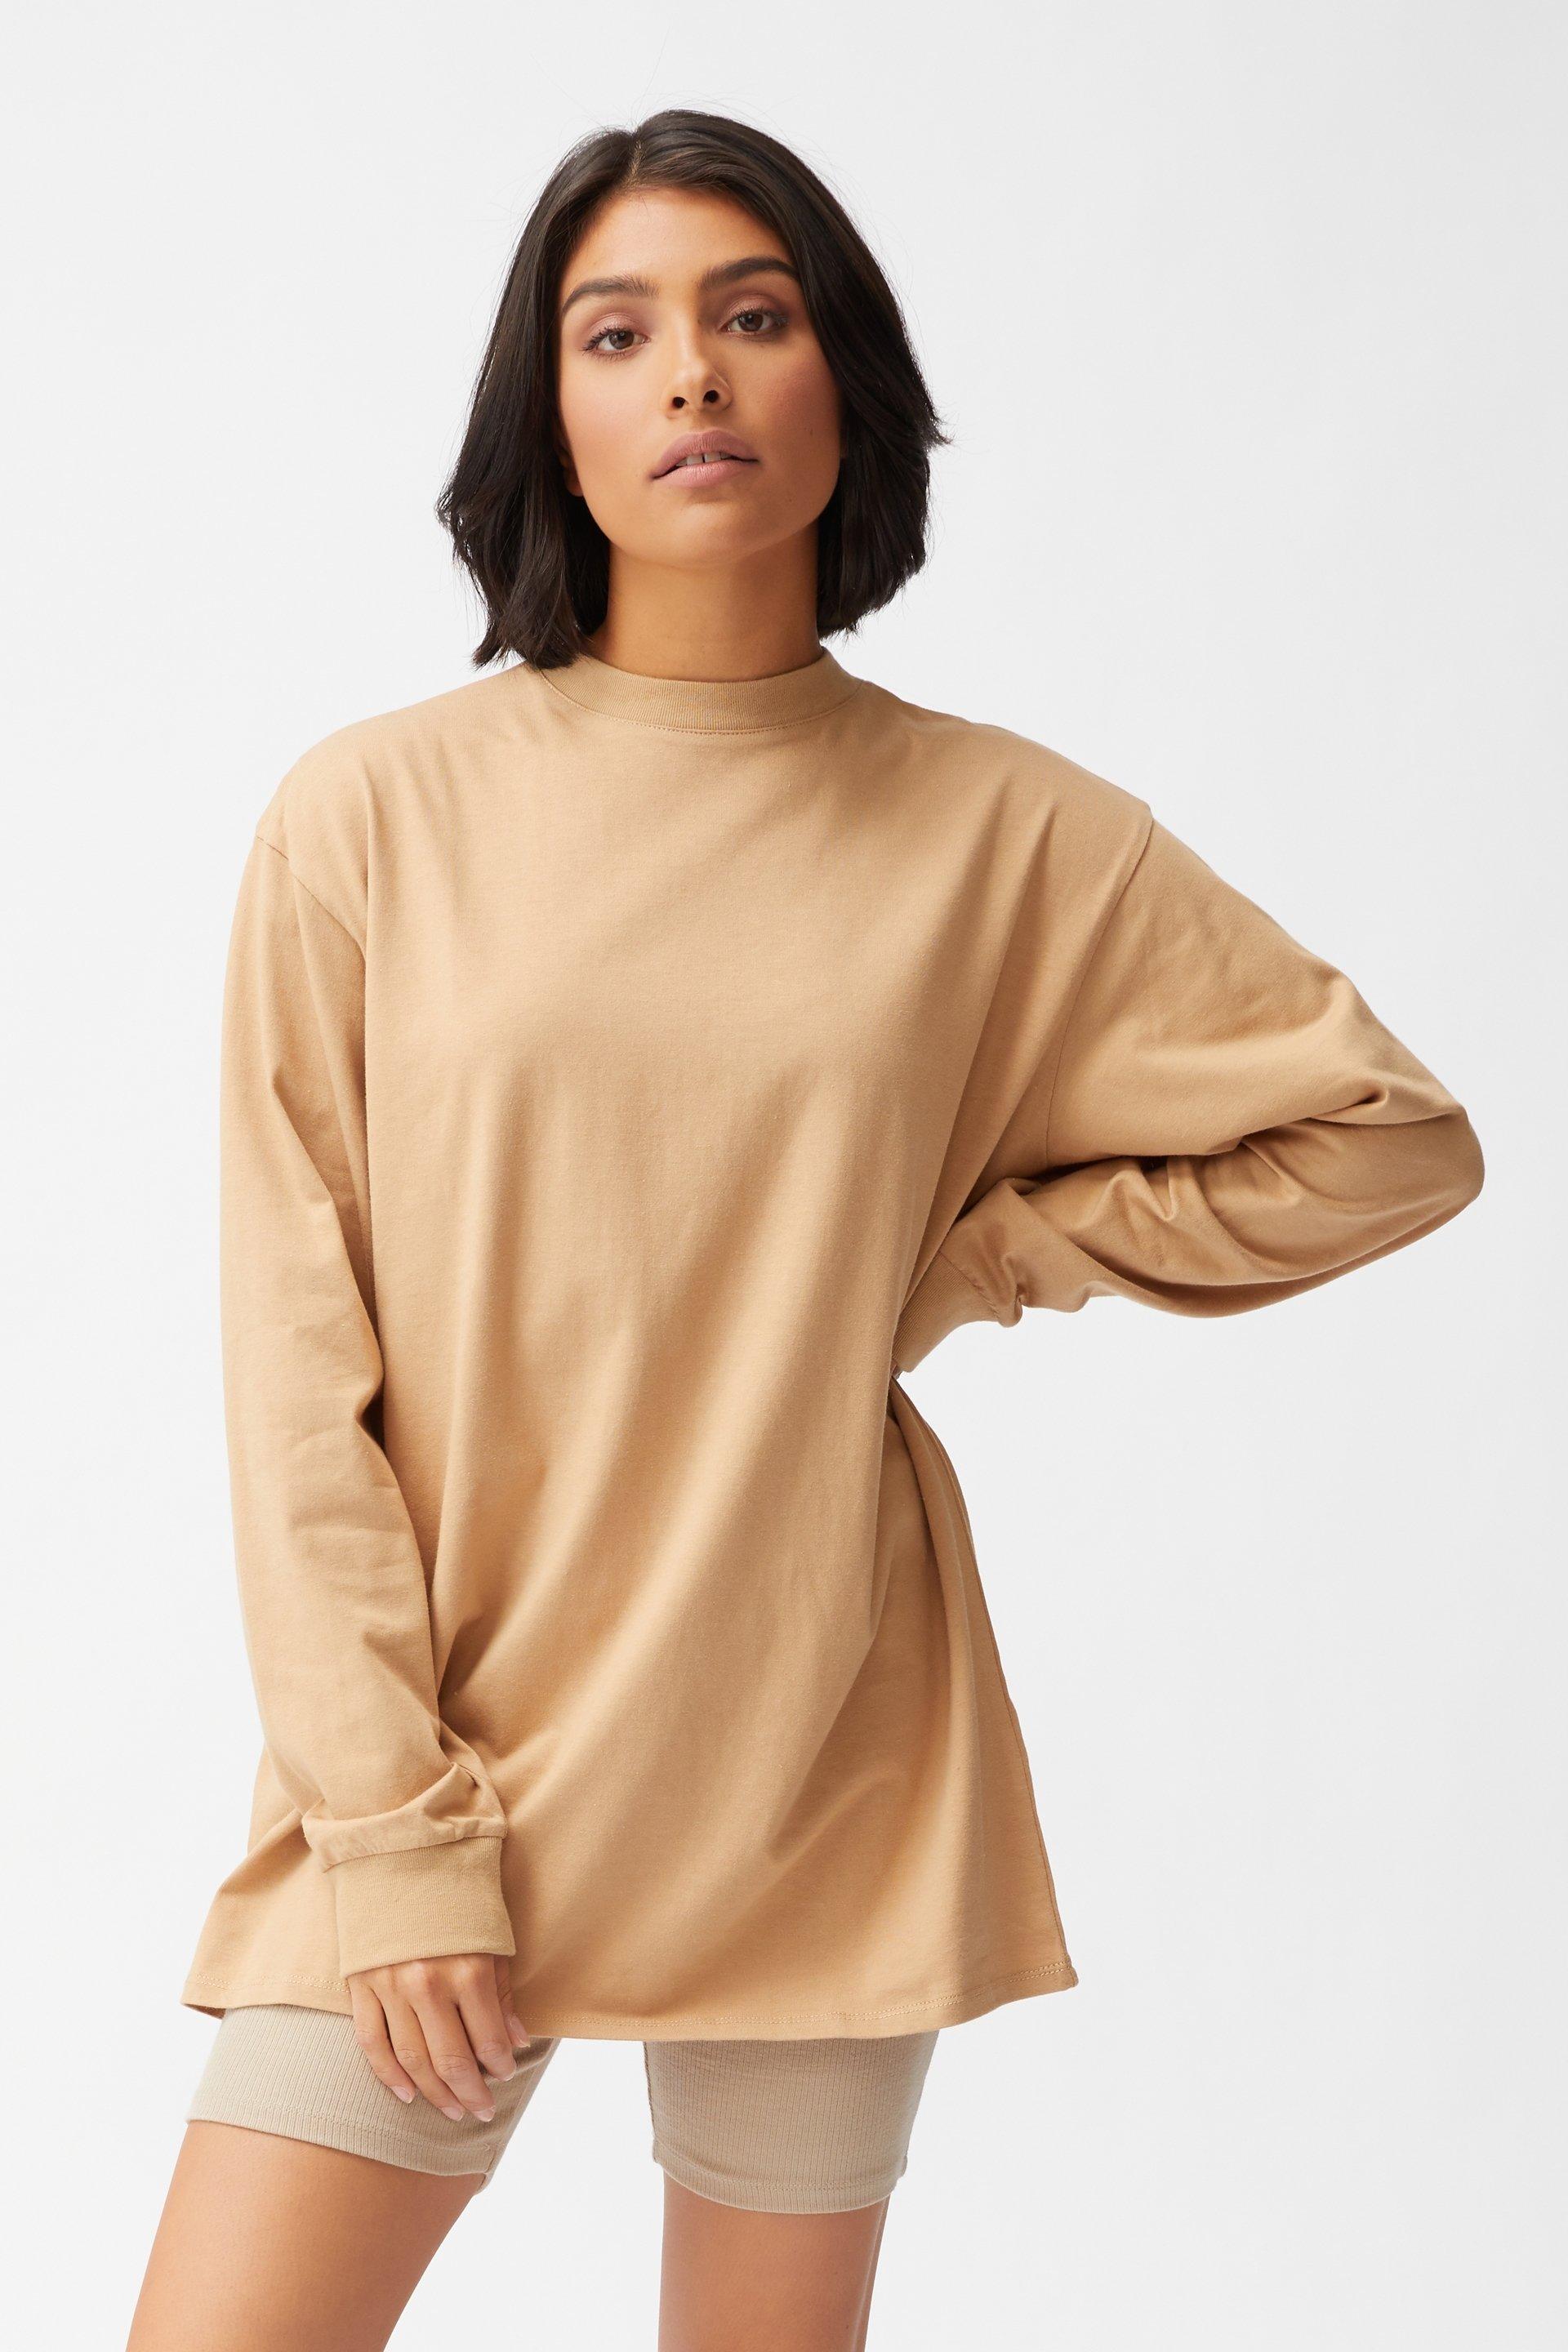 Basic oversized long sleeve top - caramel brown Cotton On T-Shirts, Vests & Camis | Superbalist.com